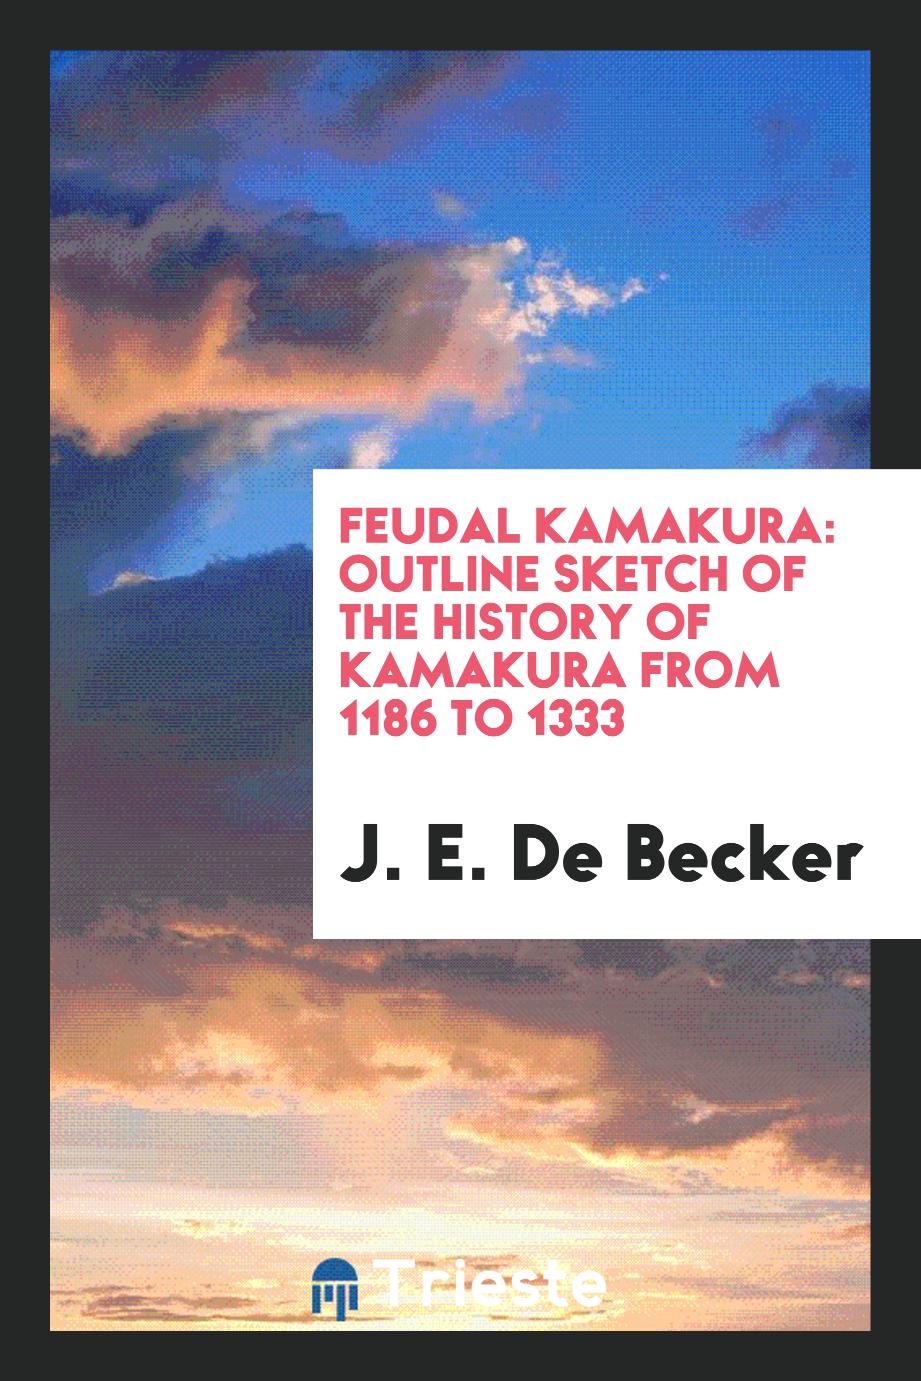 Feudal Kamakura: Outline Sketch of the History of Kamakura from 1186 to 1333